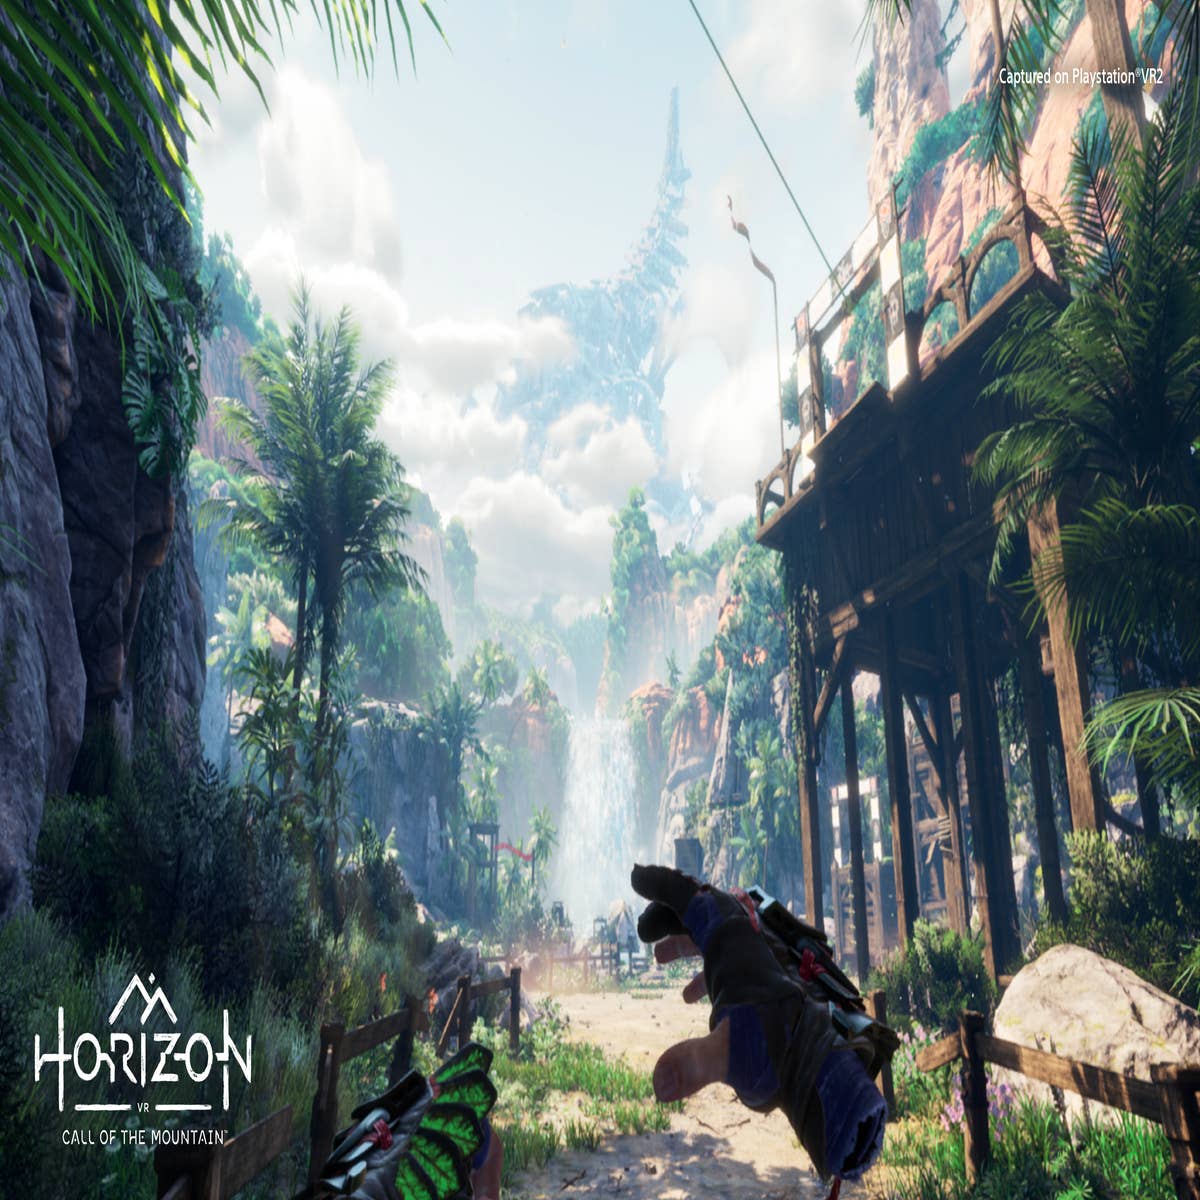 Horizon Call of the Mountain review - a visually spectacular introduction  to the PSVR2